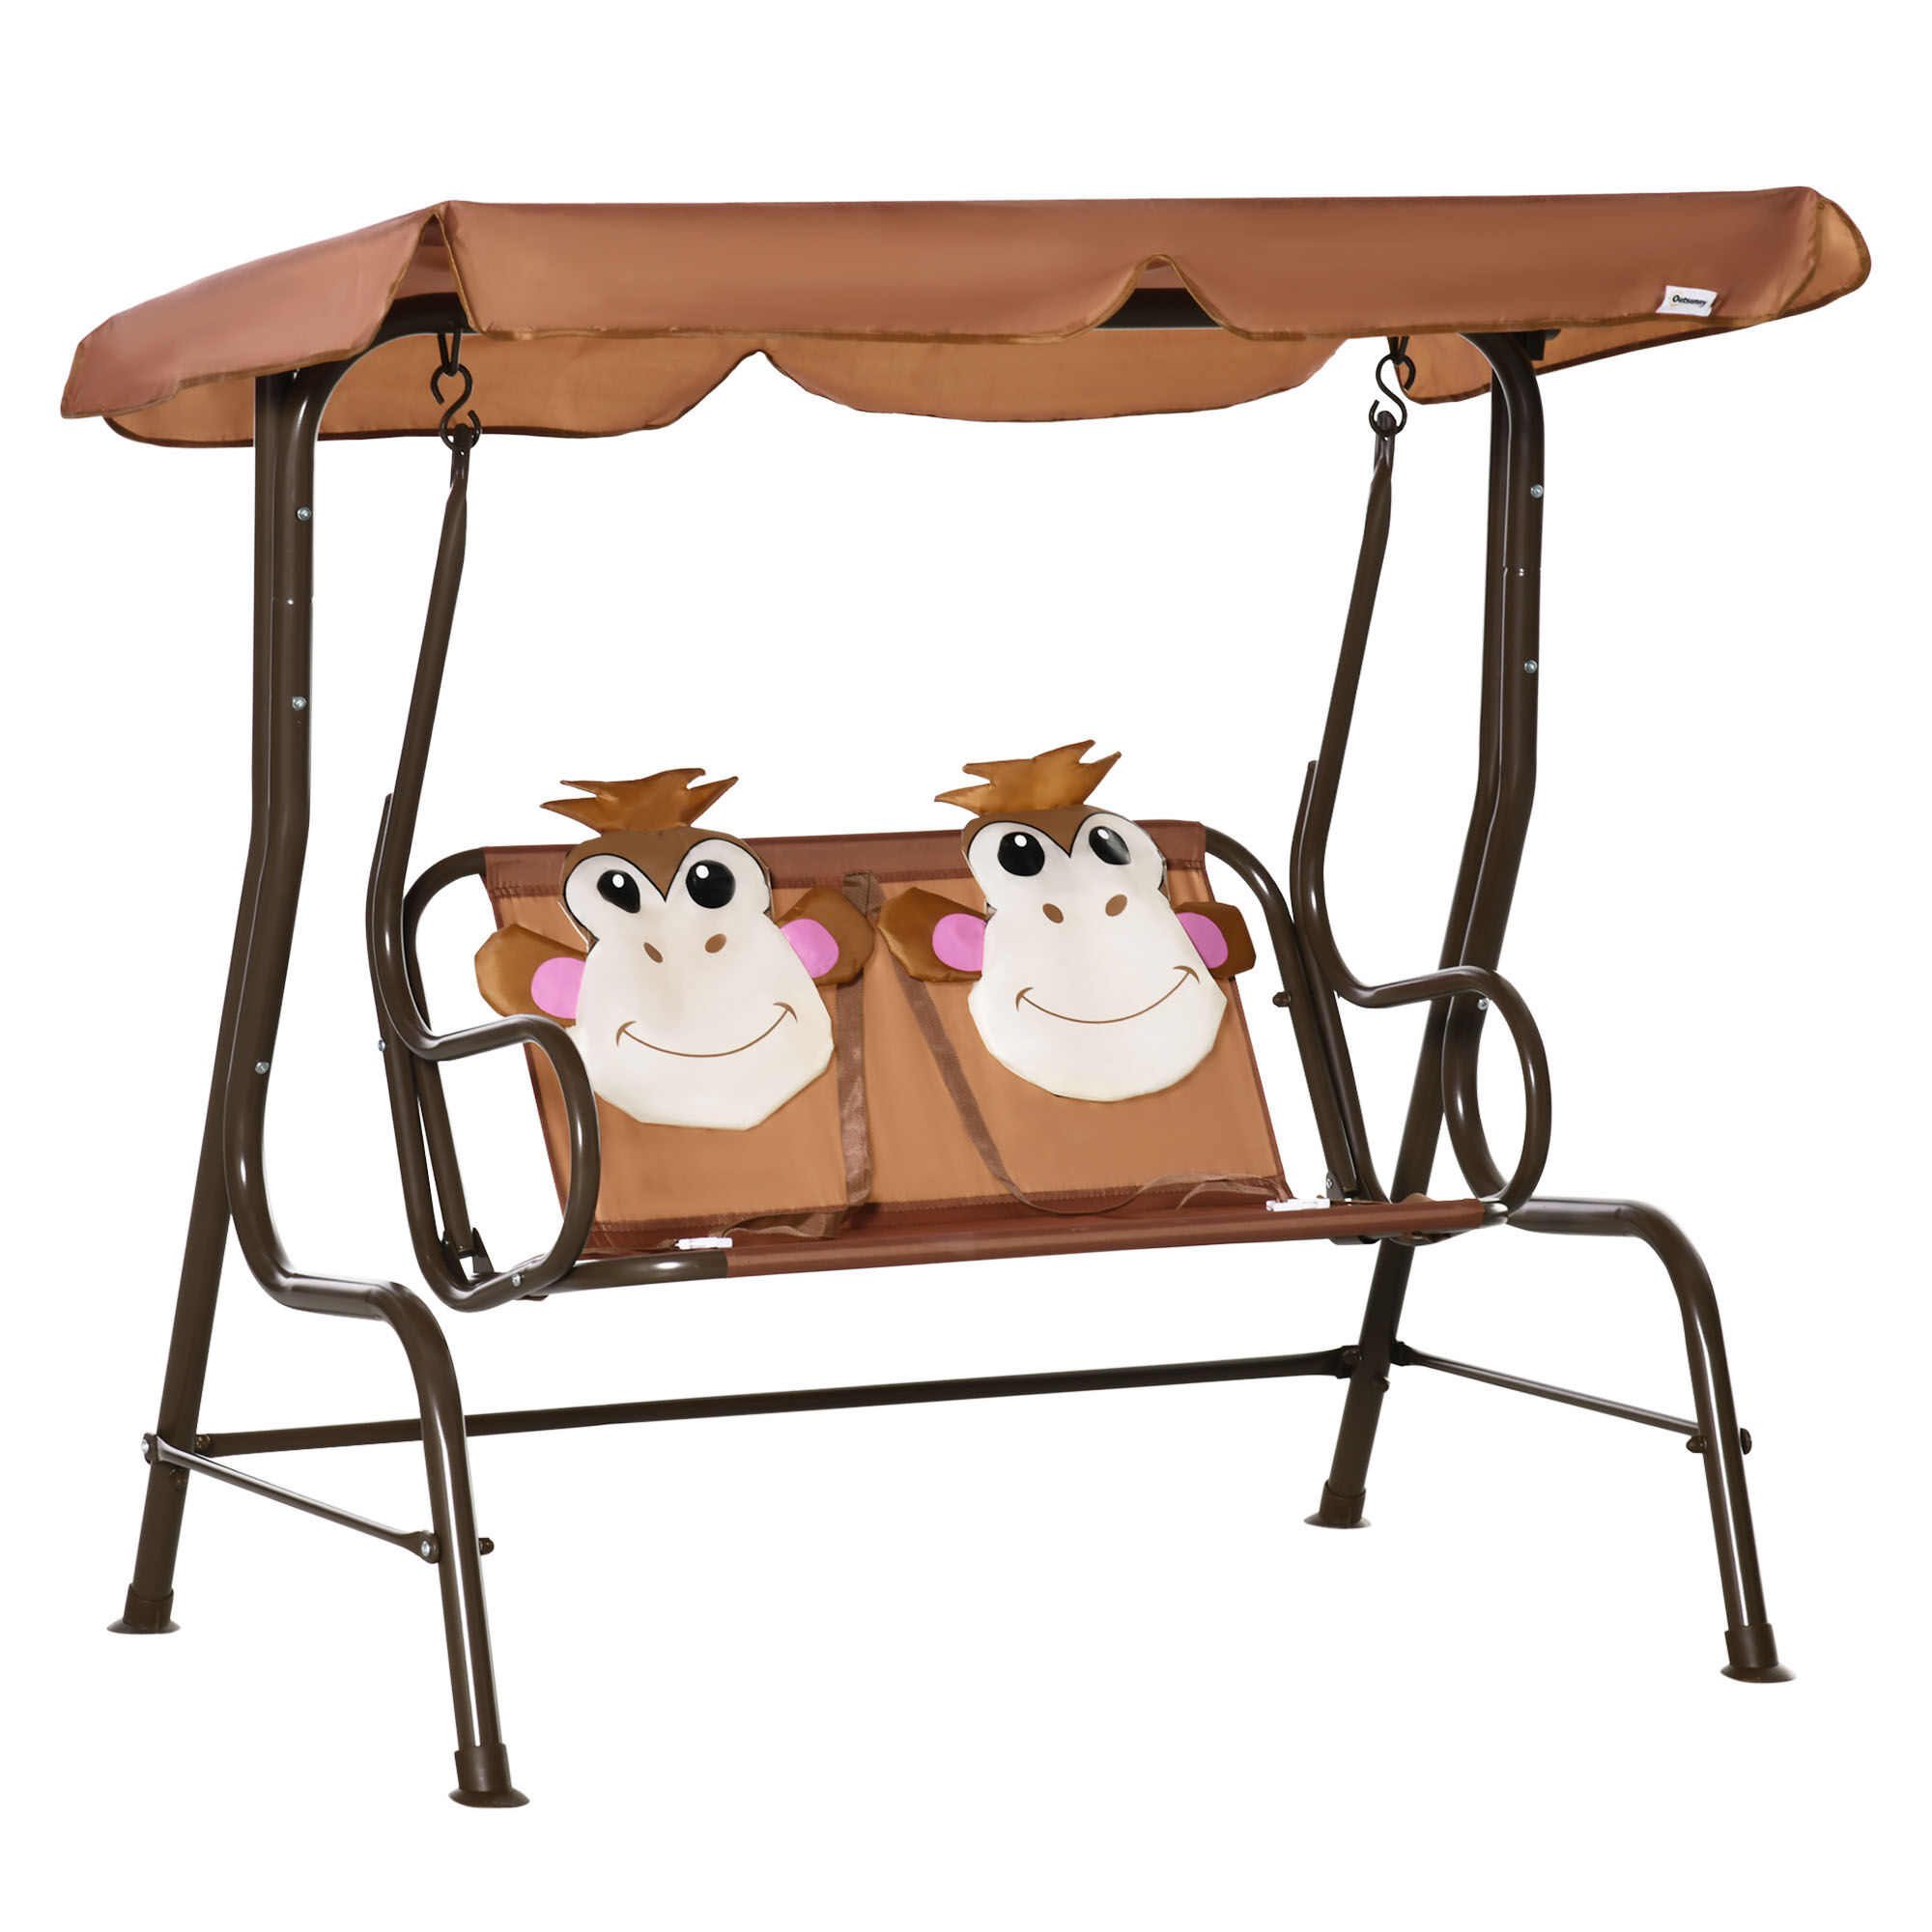 Outsunny Kids Patio Swing Chair with Monkey Pattern 2-Seat Outdoor Porch Bench for Toddlers Canopy & Seat Belt Coffee 3-6 Years   Aosom.com